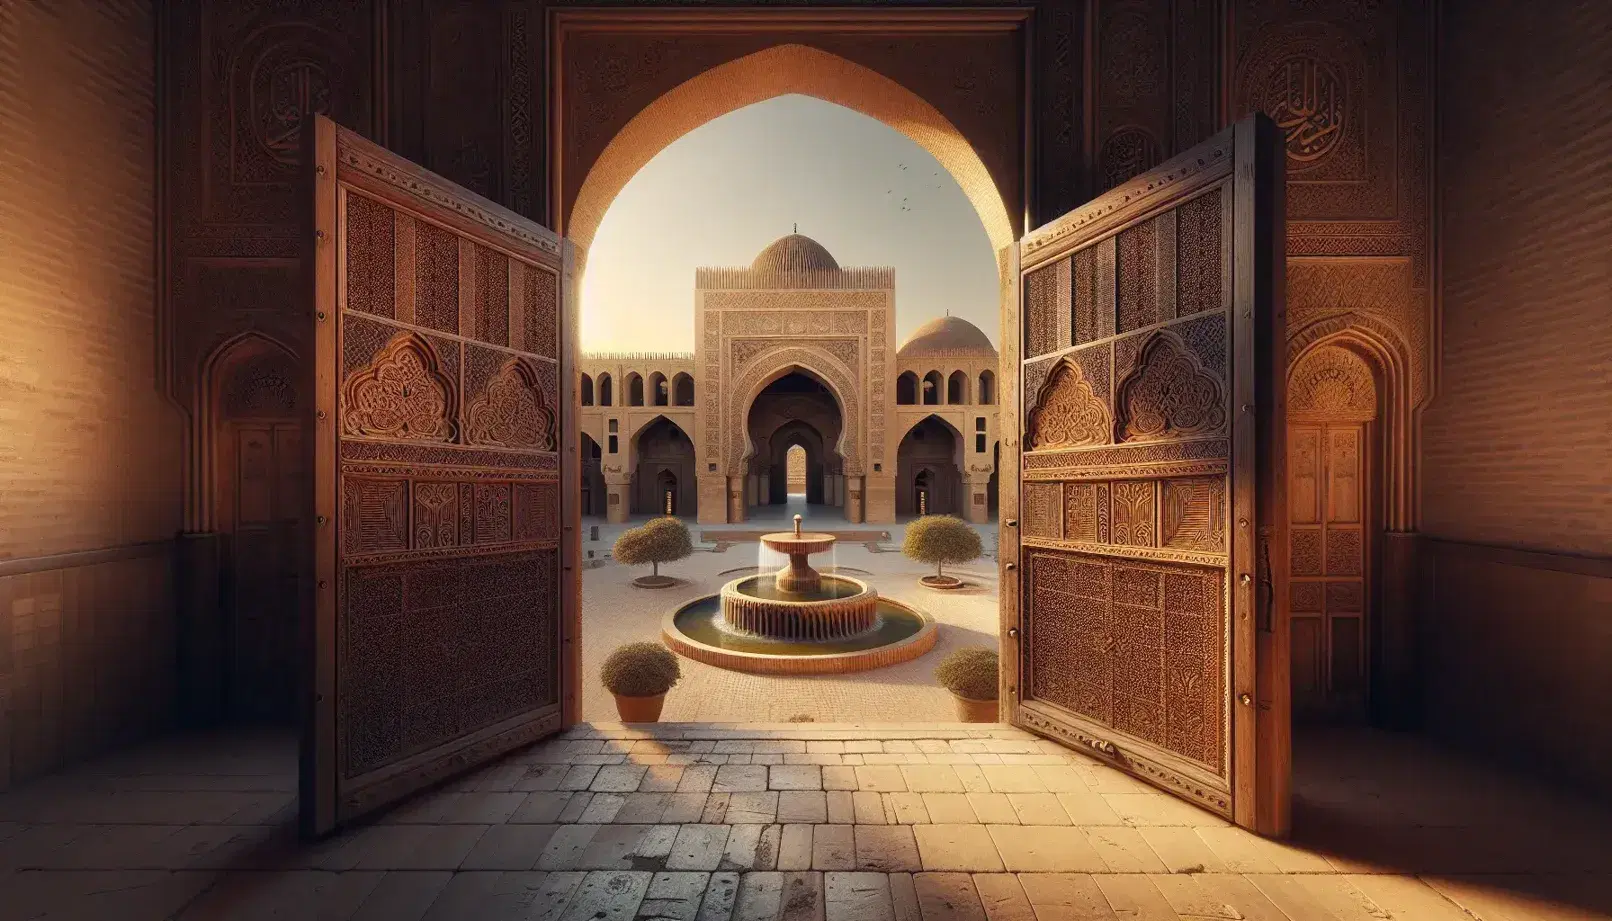 Entrance to Mustansiriya Madrasah with open carved wooden doors, stone courtyard, marble fountain, and Islamic arches under a clear blue sky.